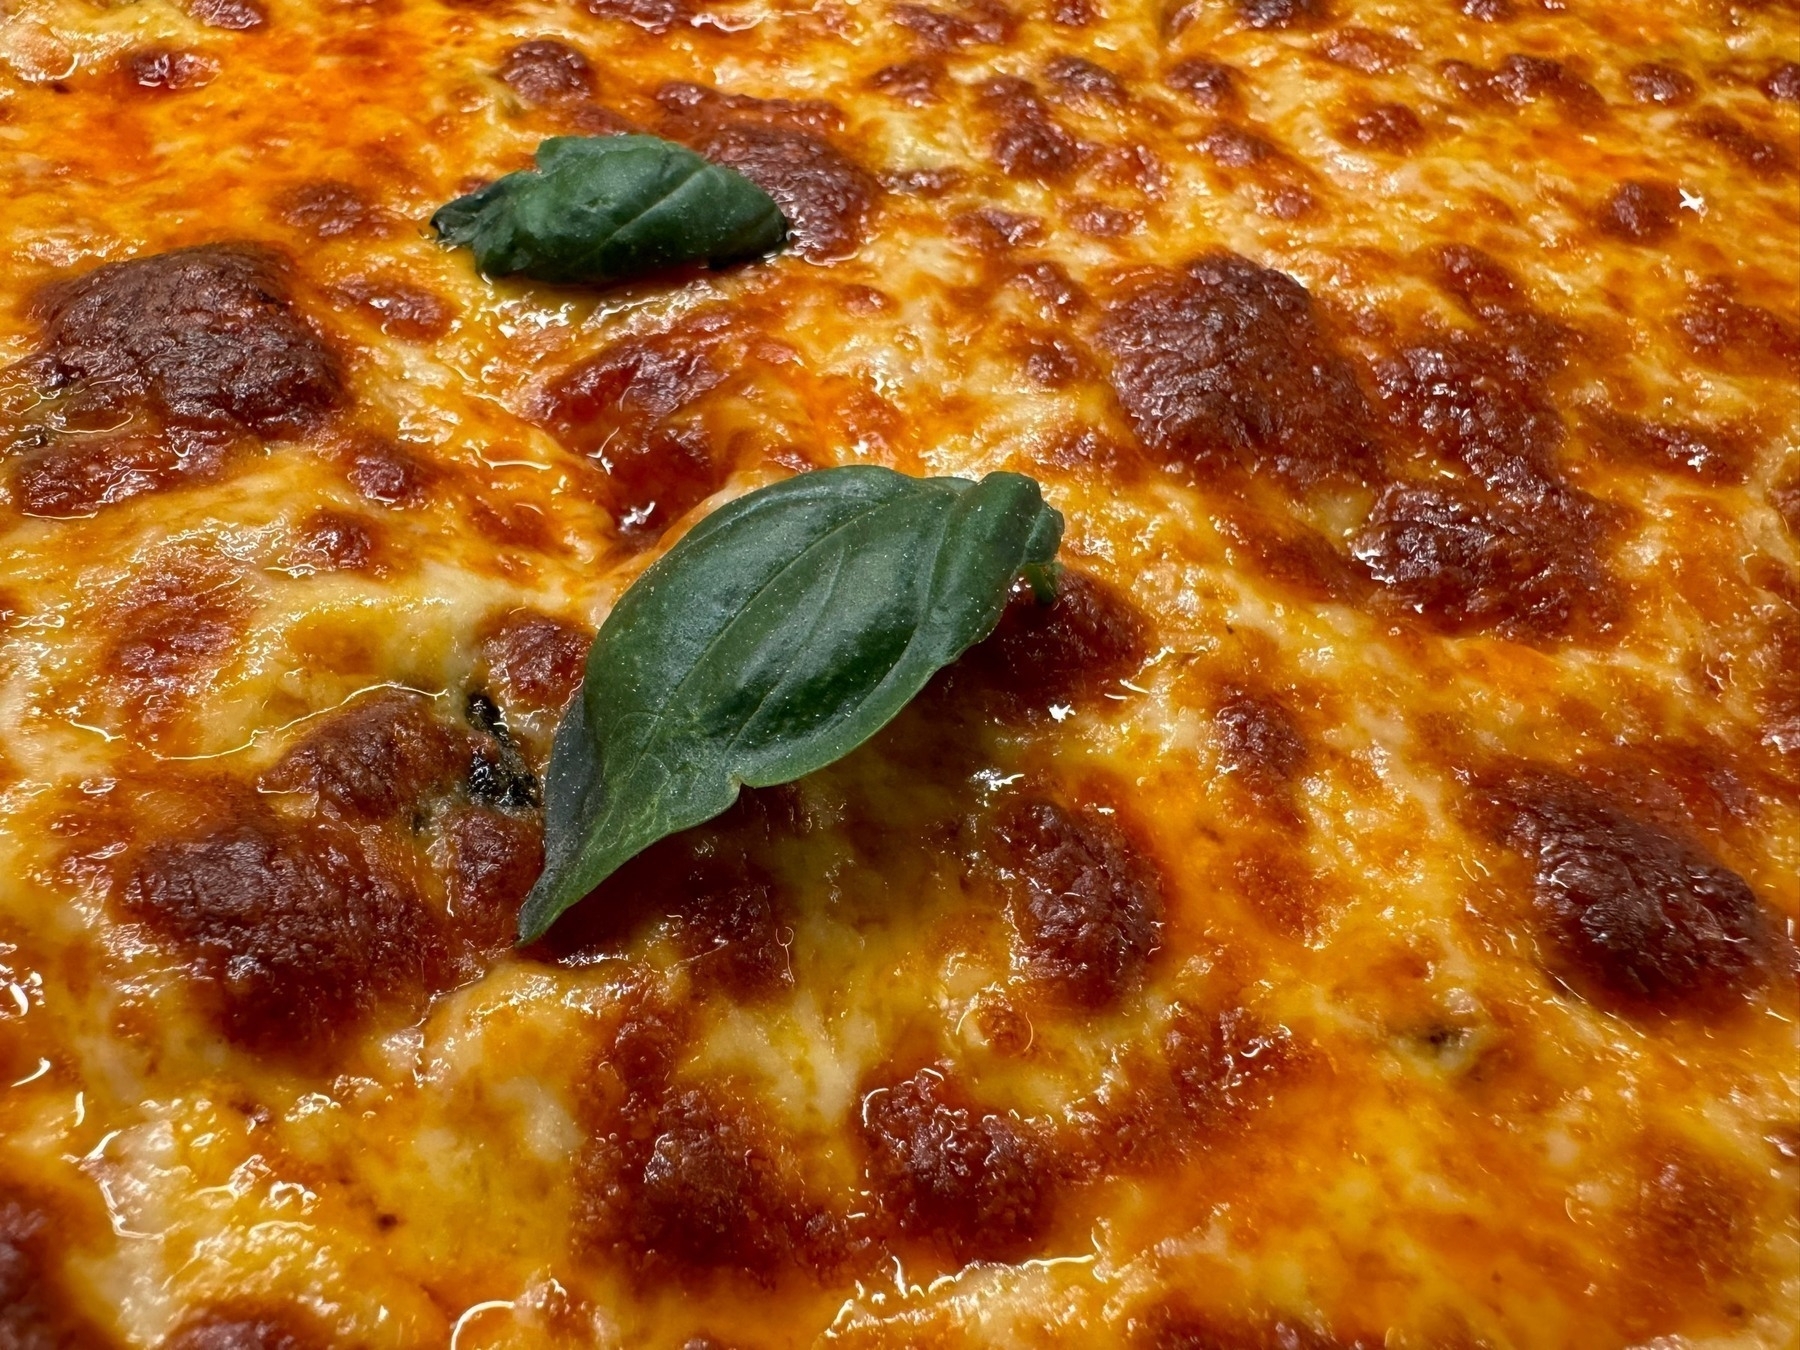 Closeup photo of a well done cheese pizza with two basil leaves on top of the cheese.